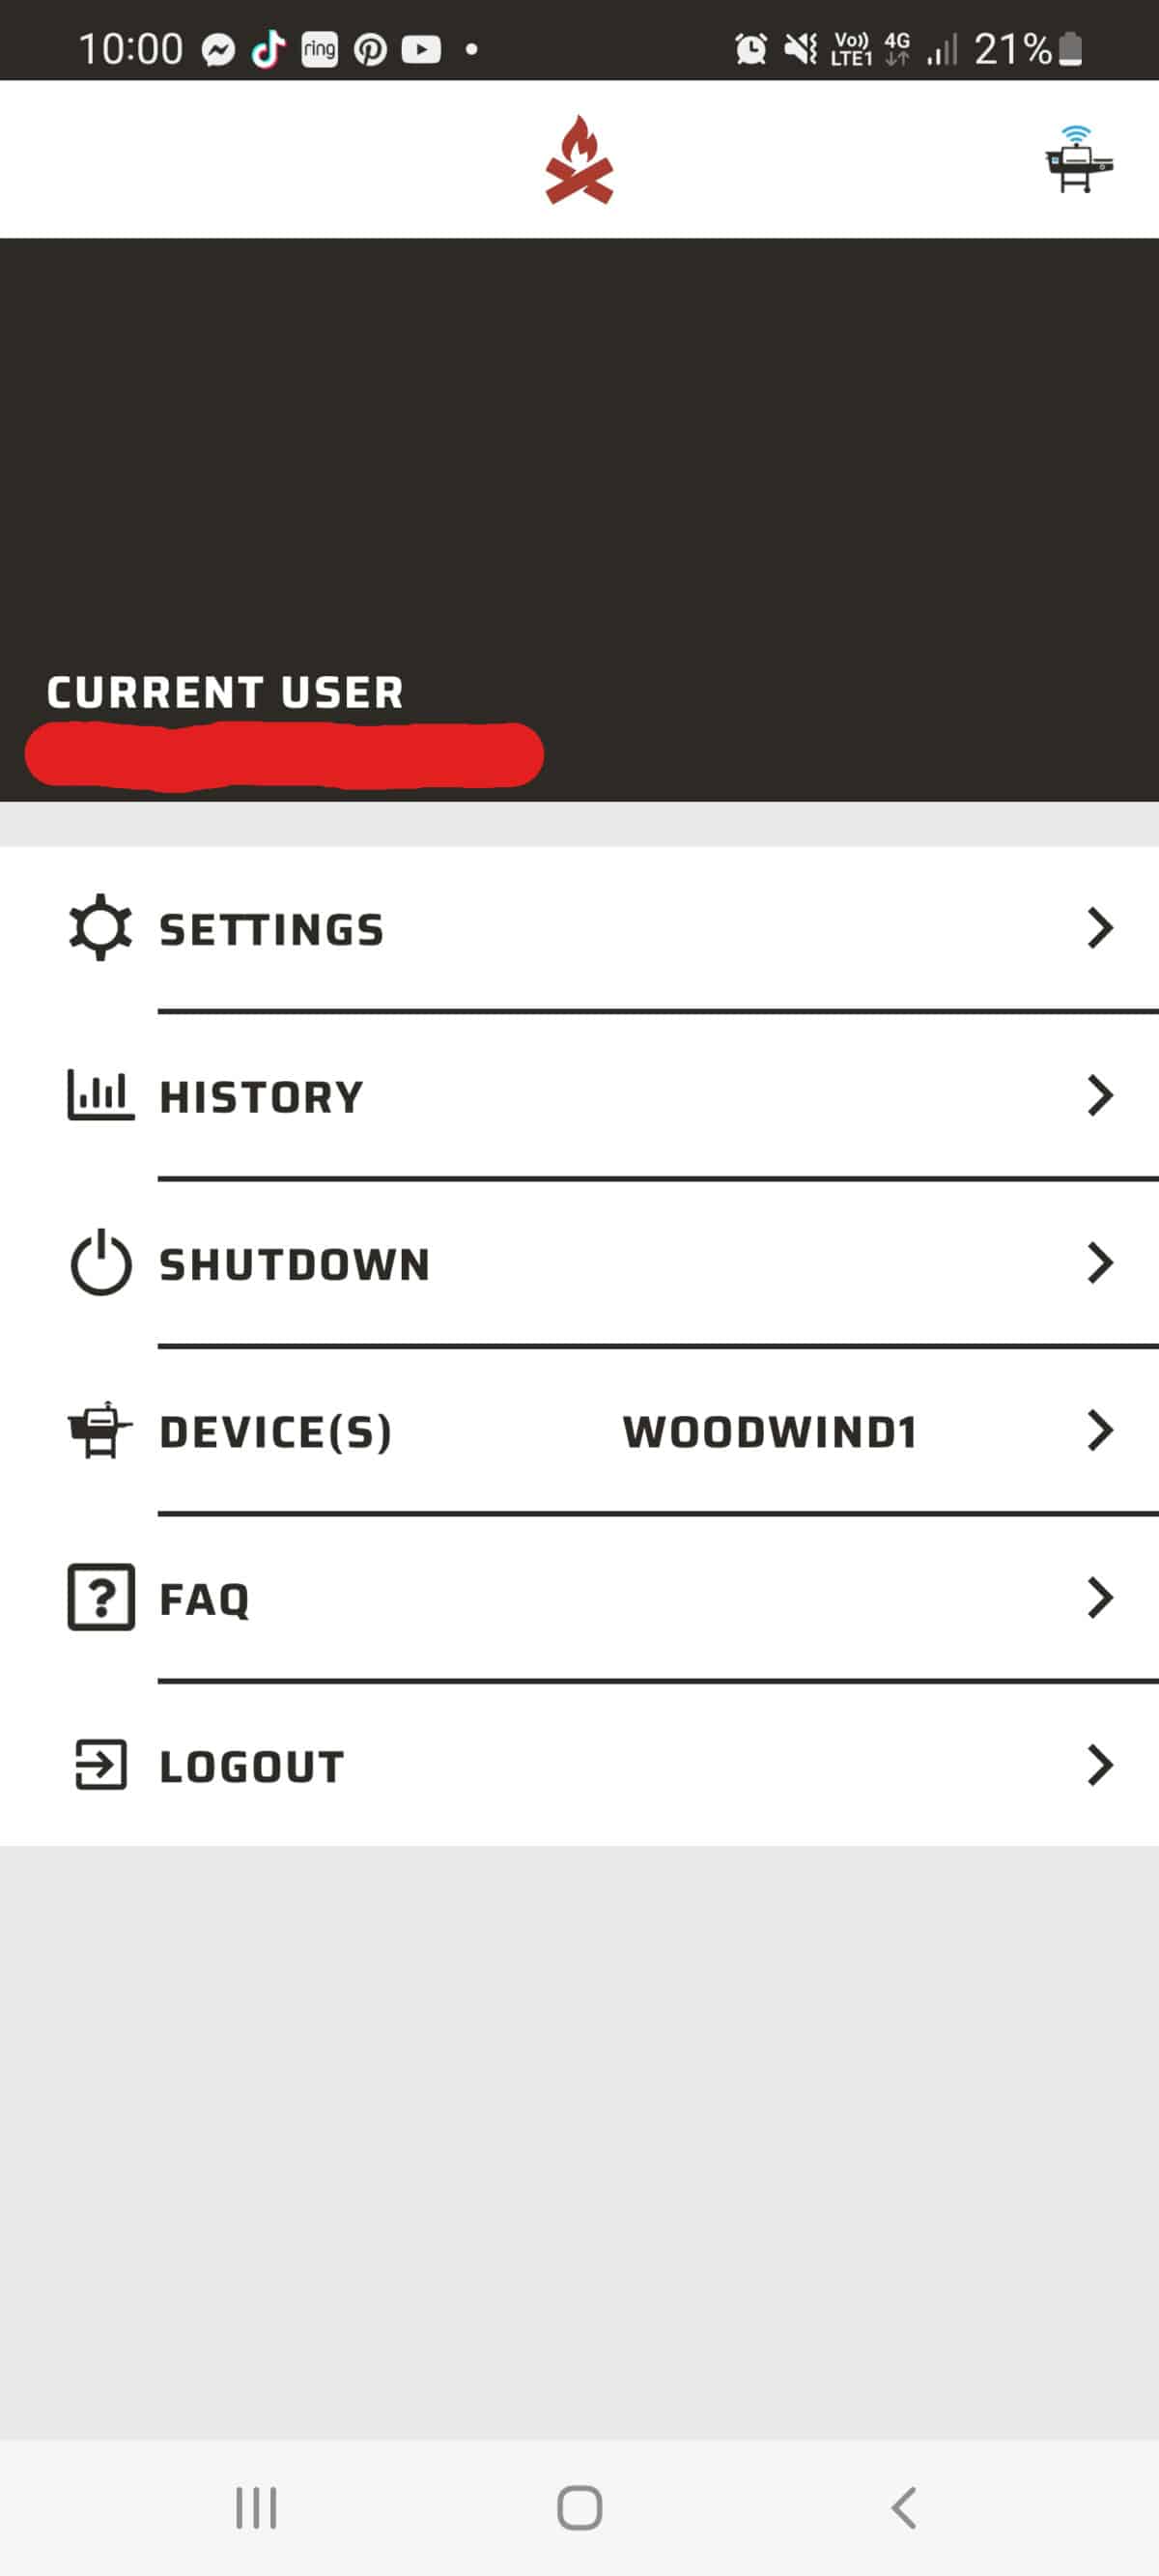 Camp Chef grill controlling smartphone app screenshot showing the main options screen.